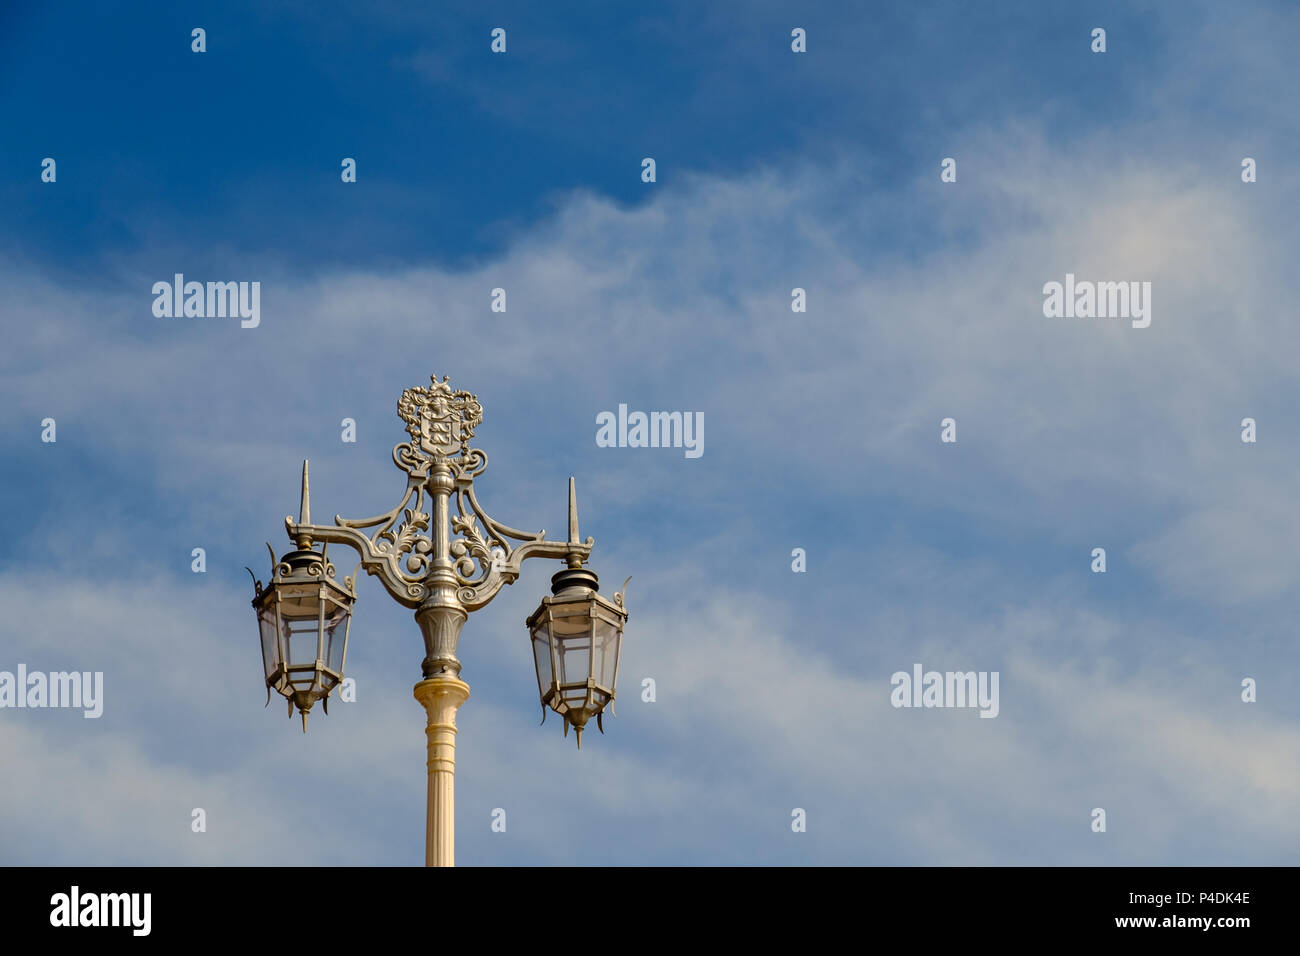 Ornate street lamp on the seafront in the city of Brighton, East Sussex, England, UK in landscape orientation. Stock Photo